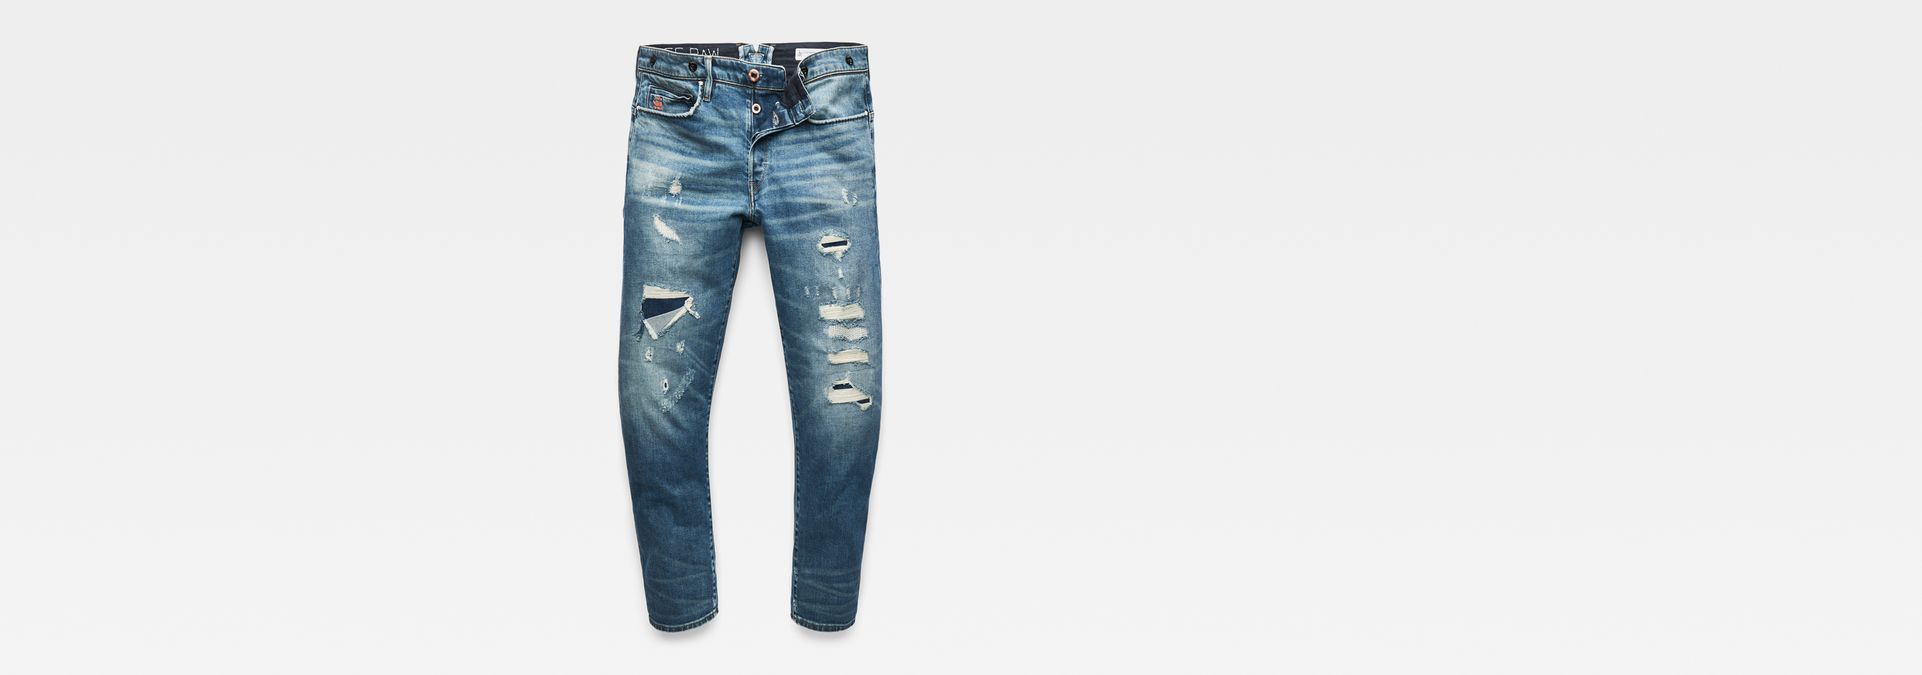 g star jeans sizing